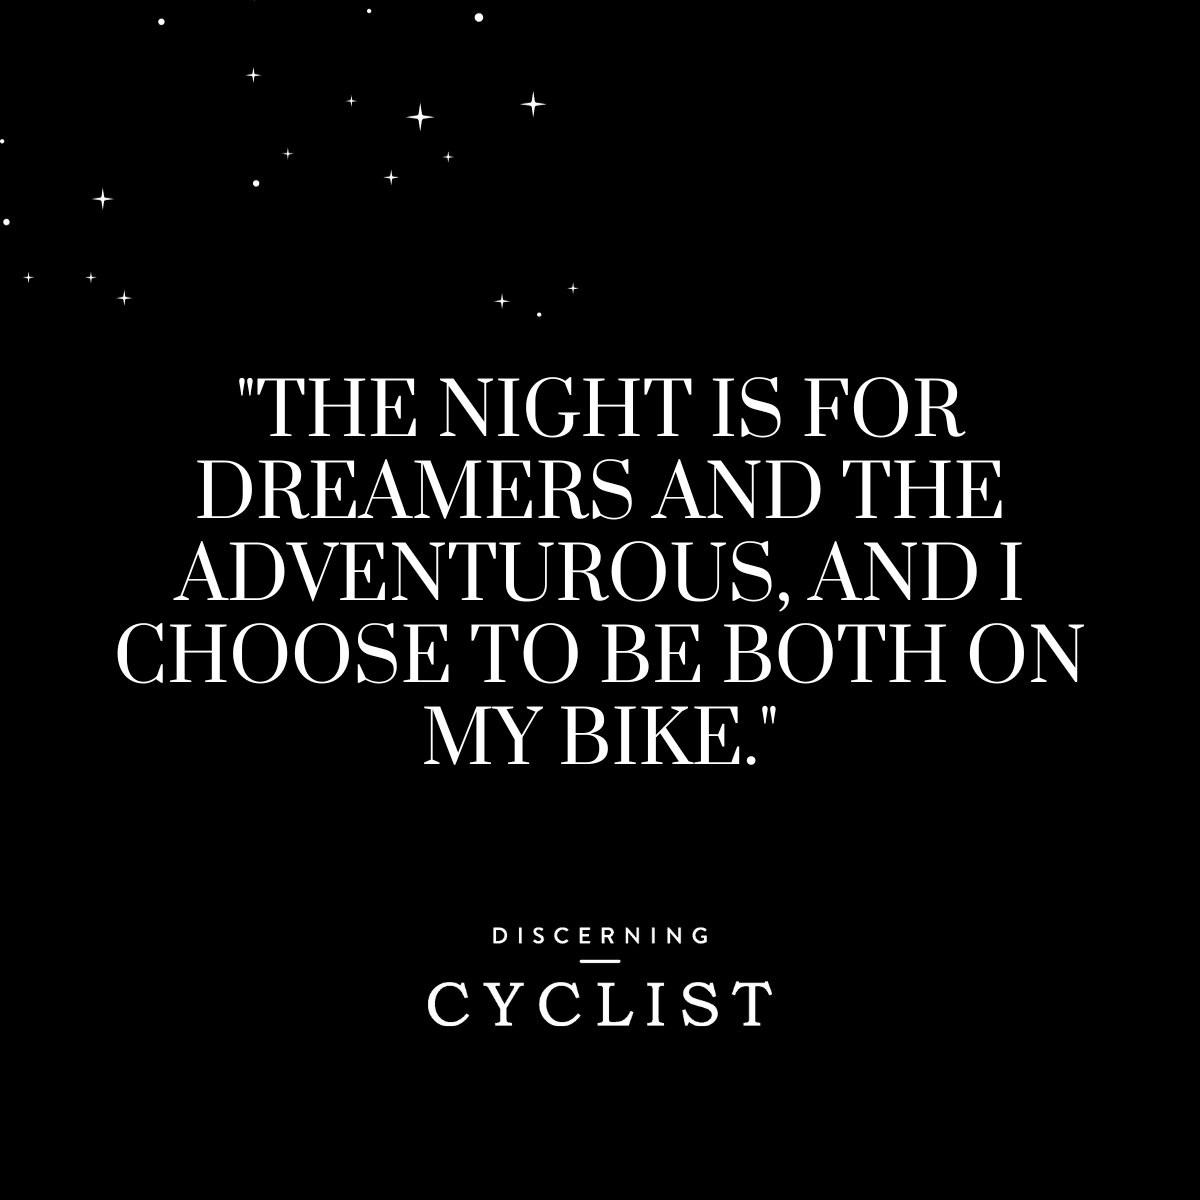 "The night is for dreamers and the adventurous, and I choose to be both on my bike."